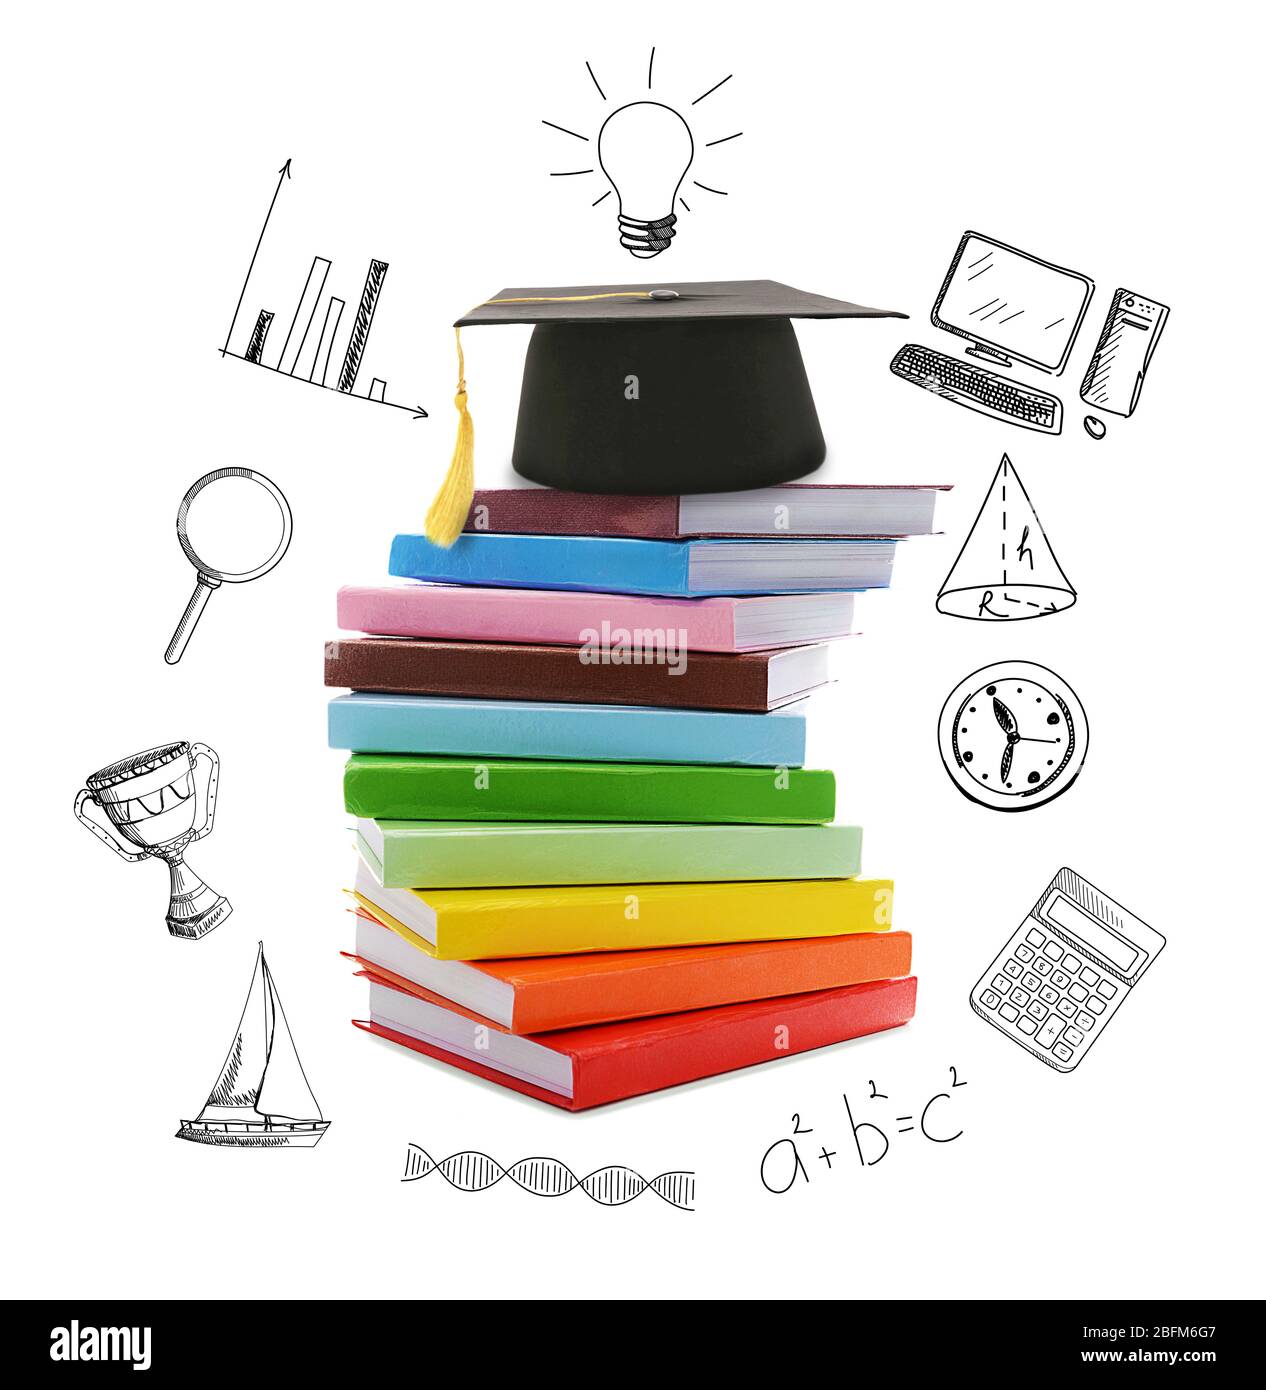 Pile of books with grad hat and vector images, isolated on white Stock Photo